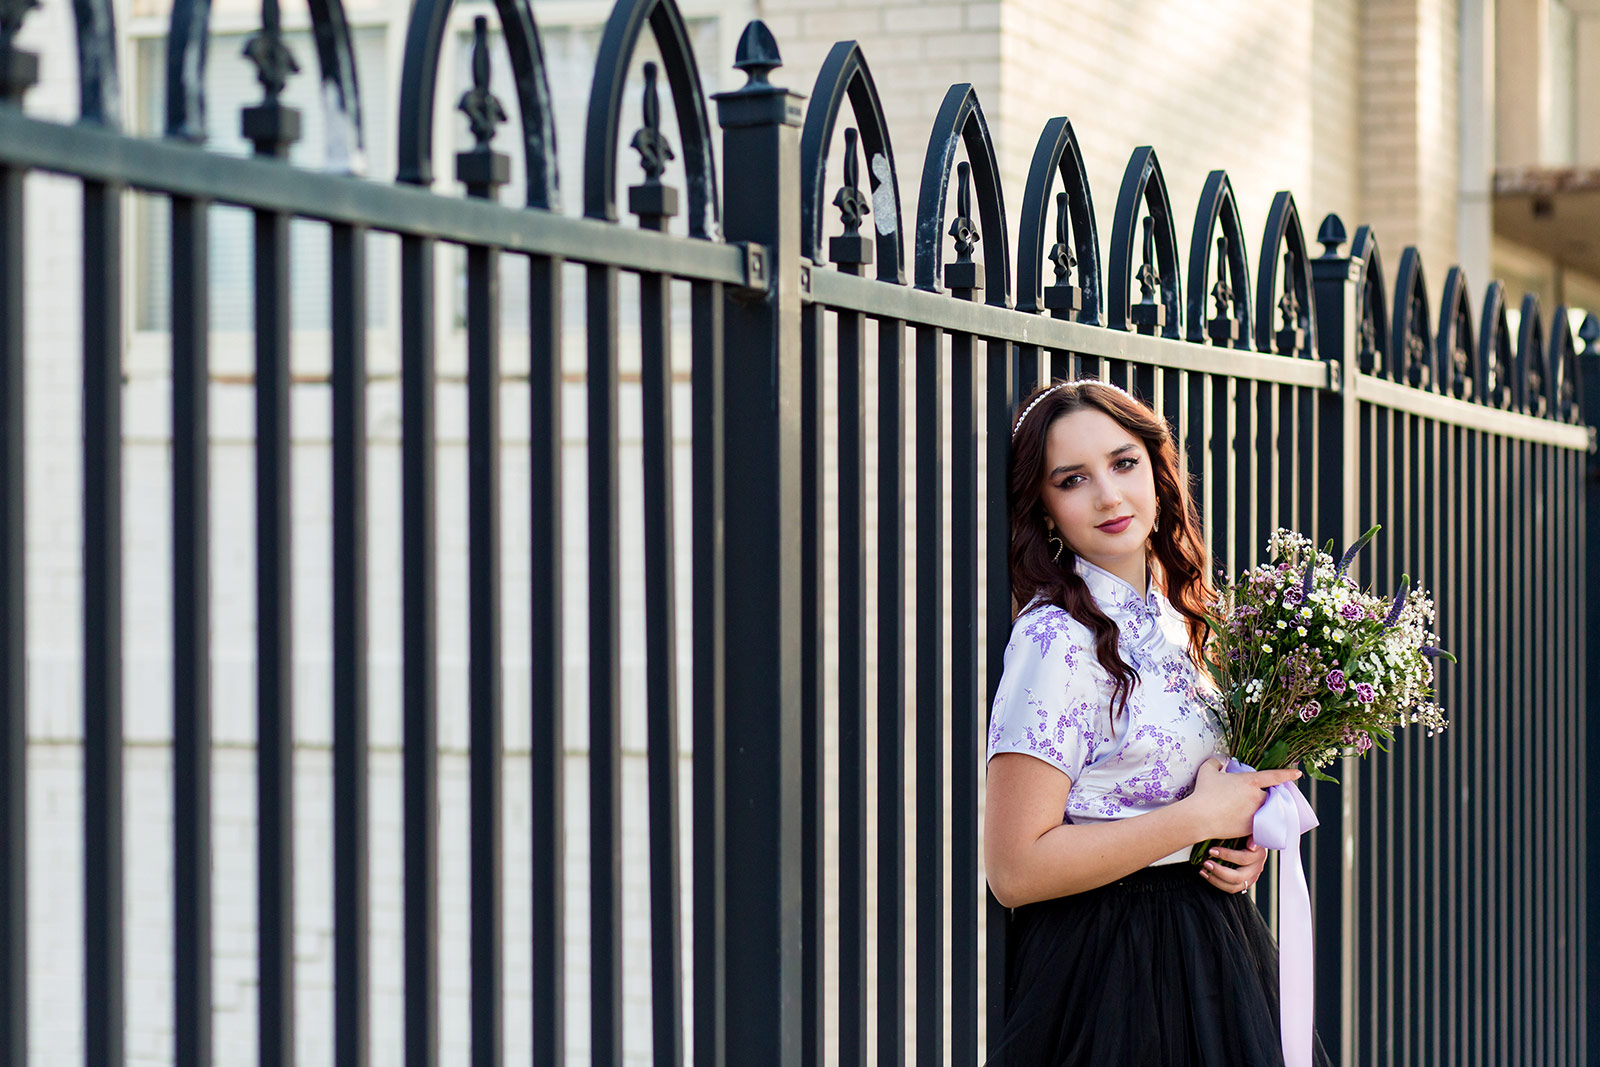 Isabella leans against a wrought-iron fence.